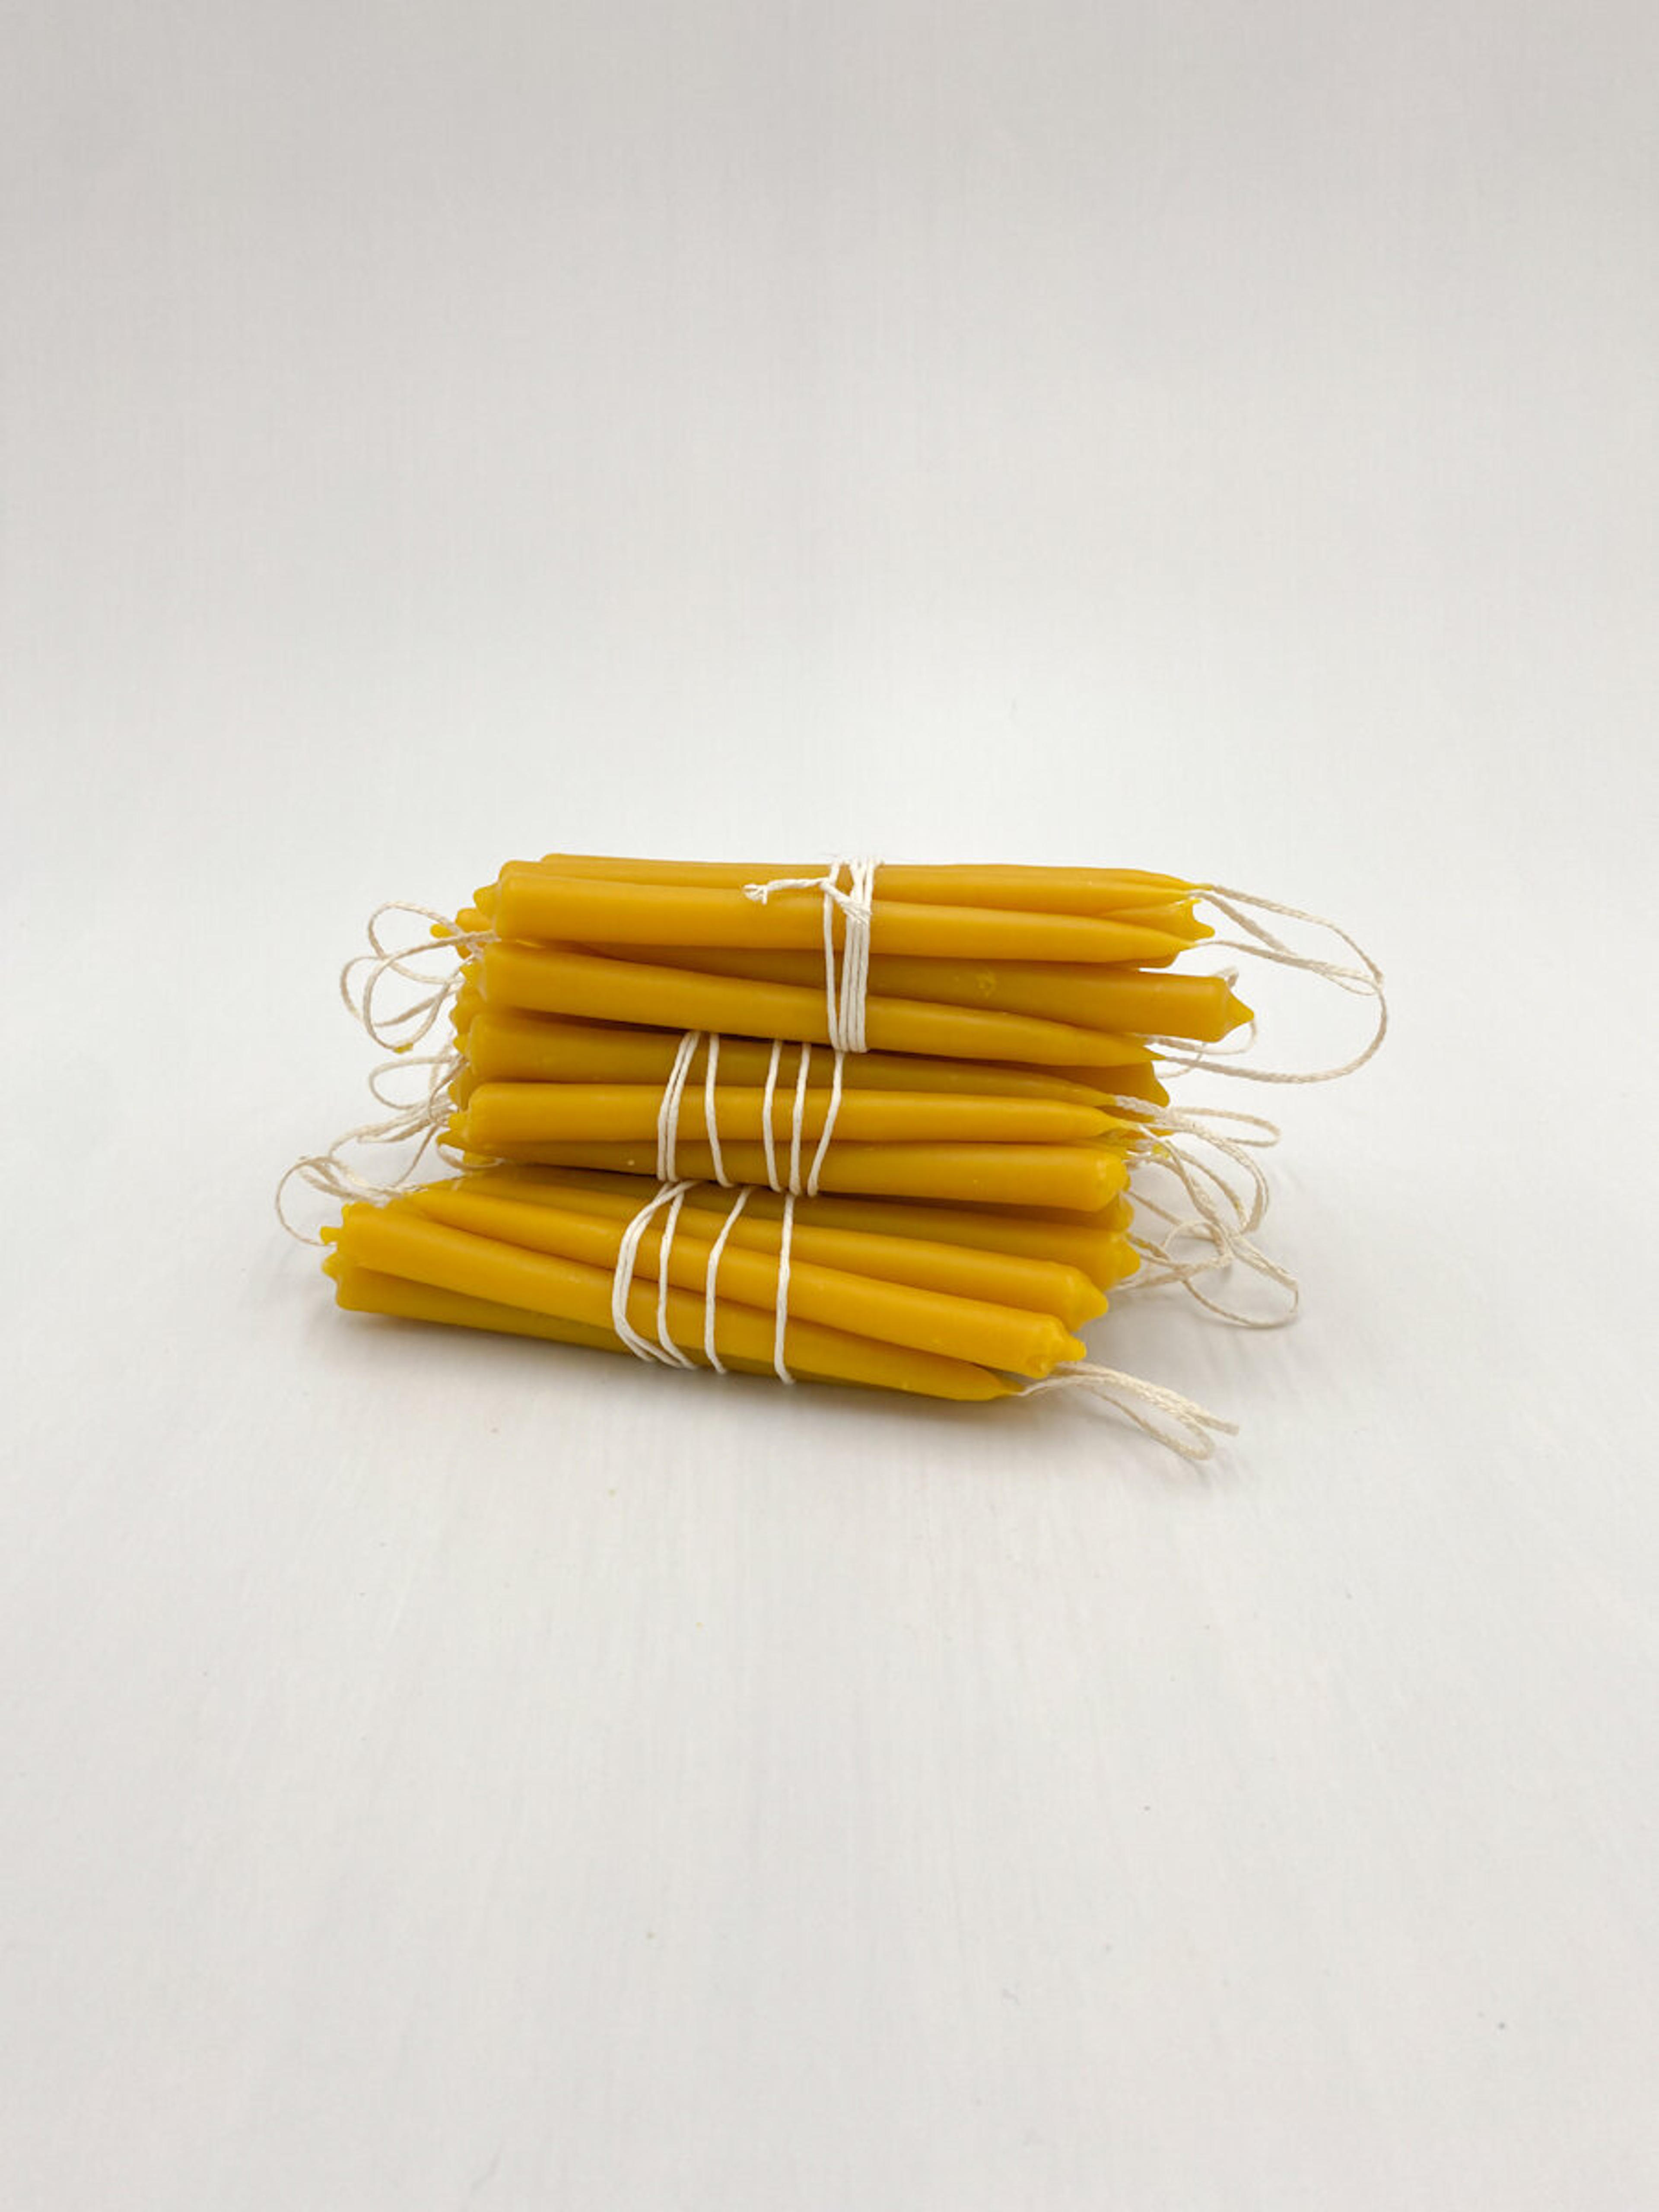 Beeswax Chime Candles — Beeswax Candles by Alysia Mazzella